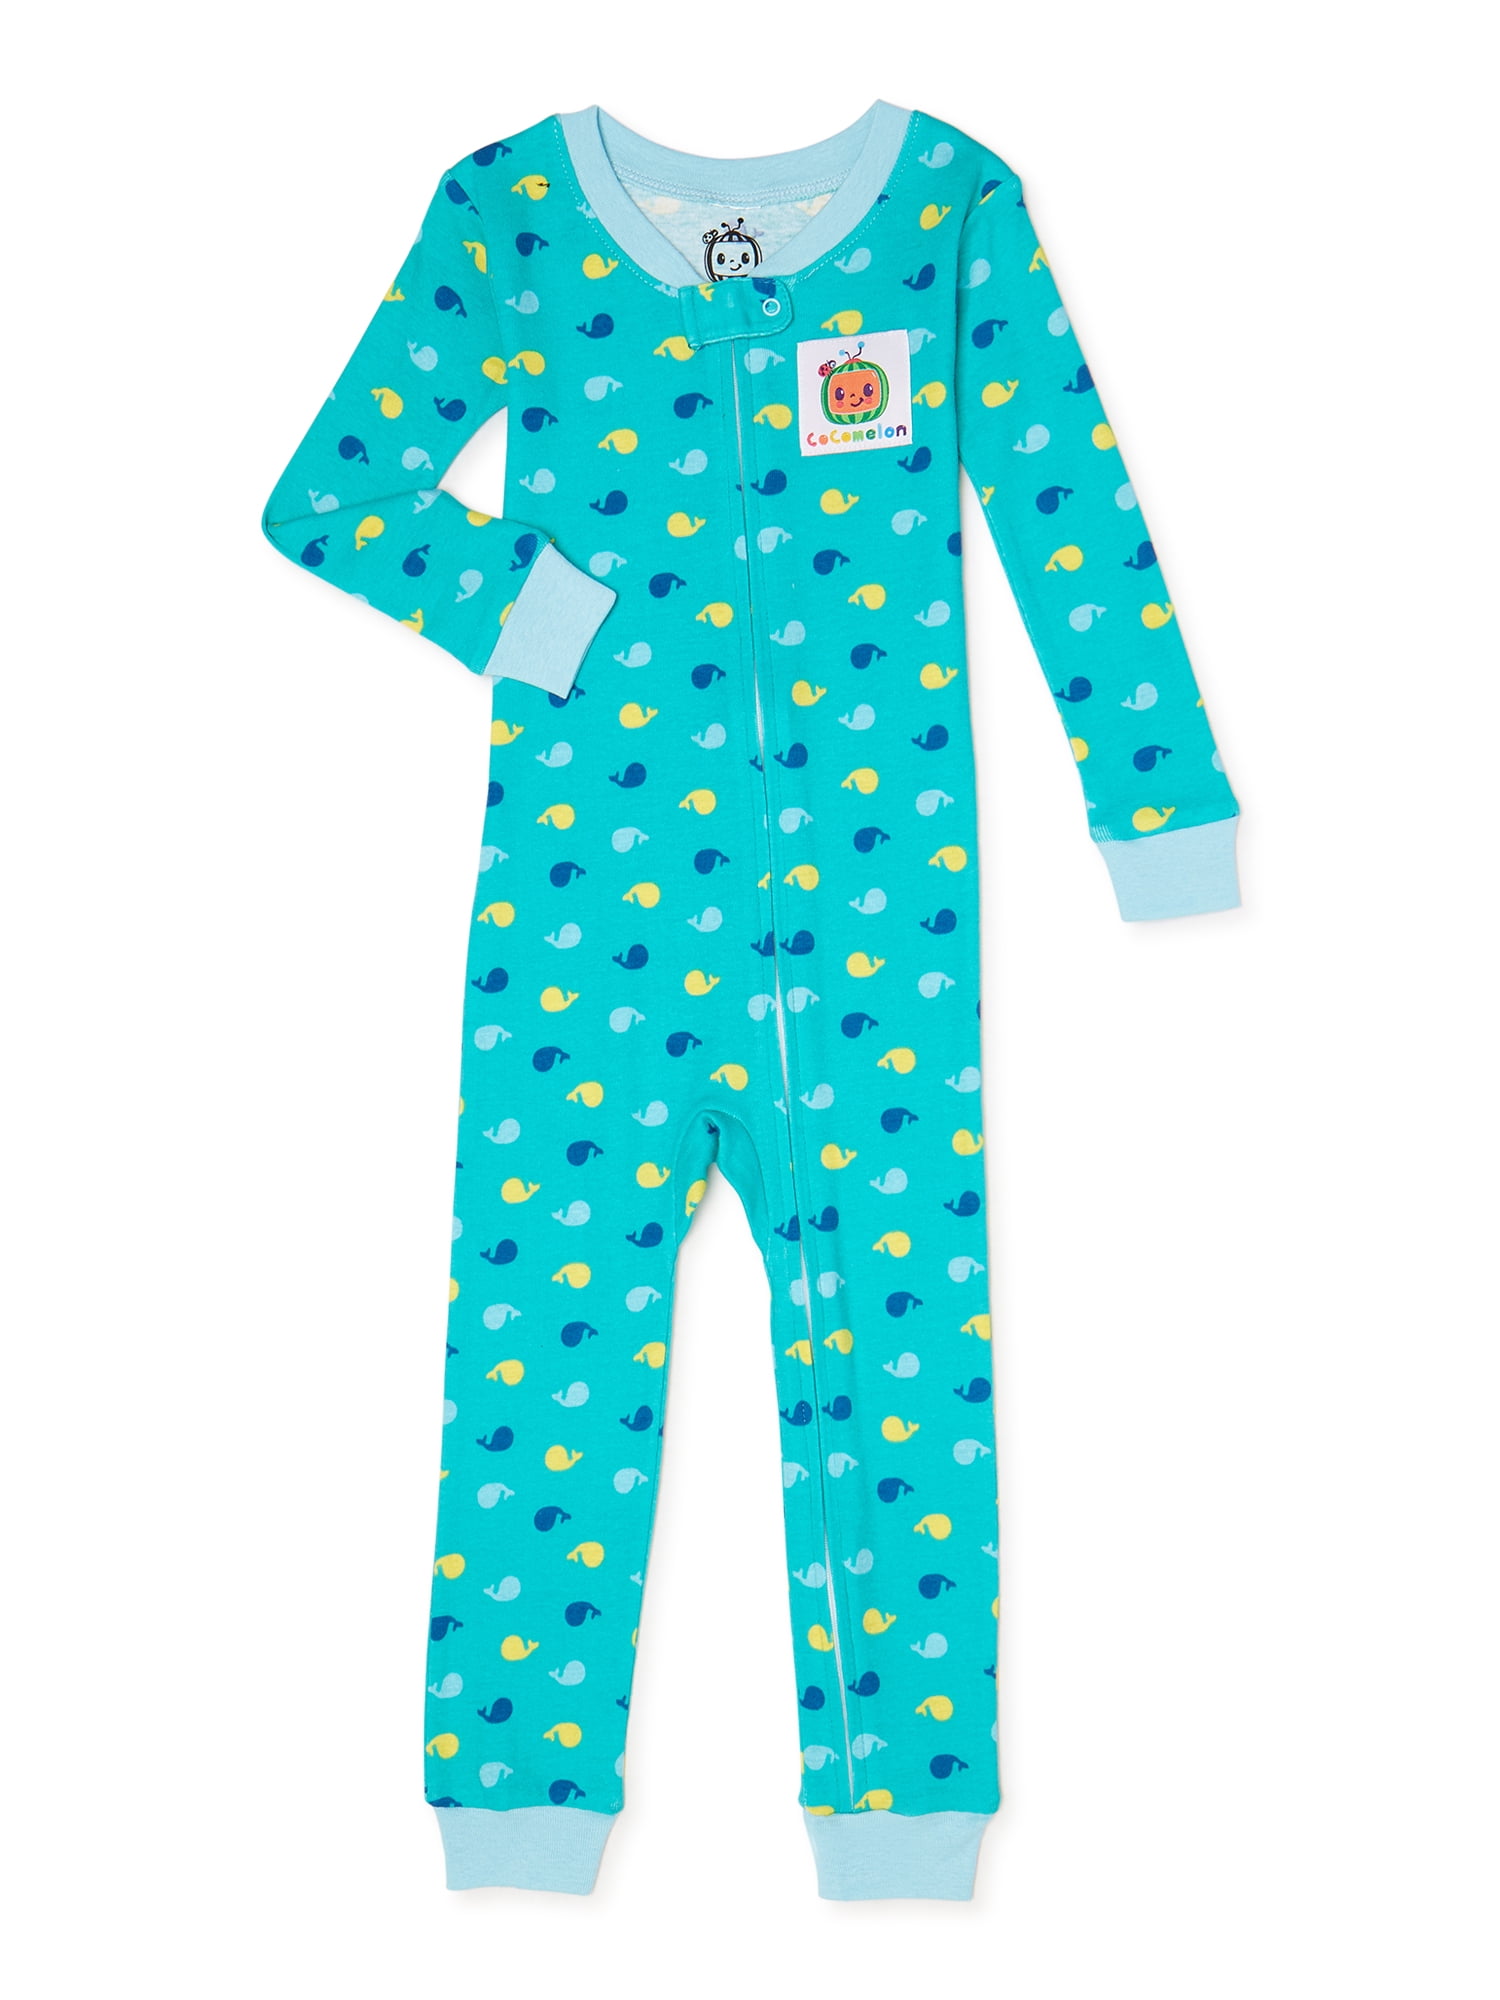 CoComelon - Cocomelon Baby & Toddler Snug Fit Cotton Footless Pajamas